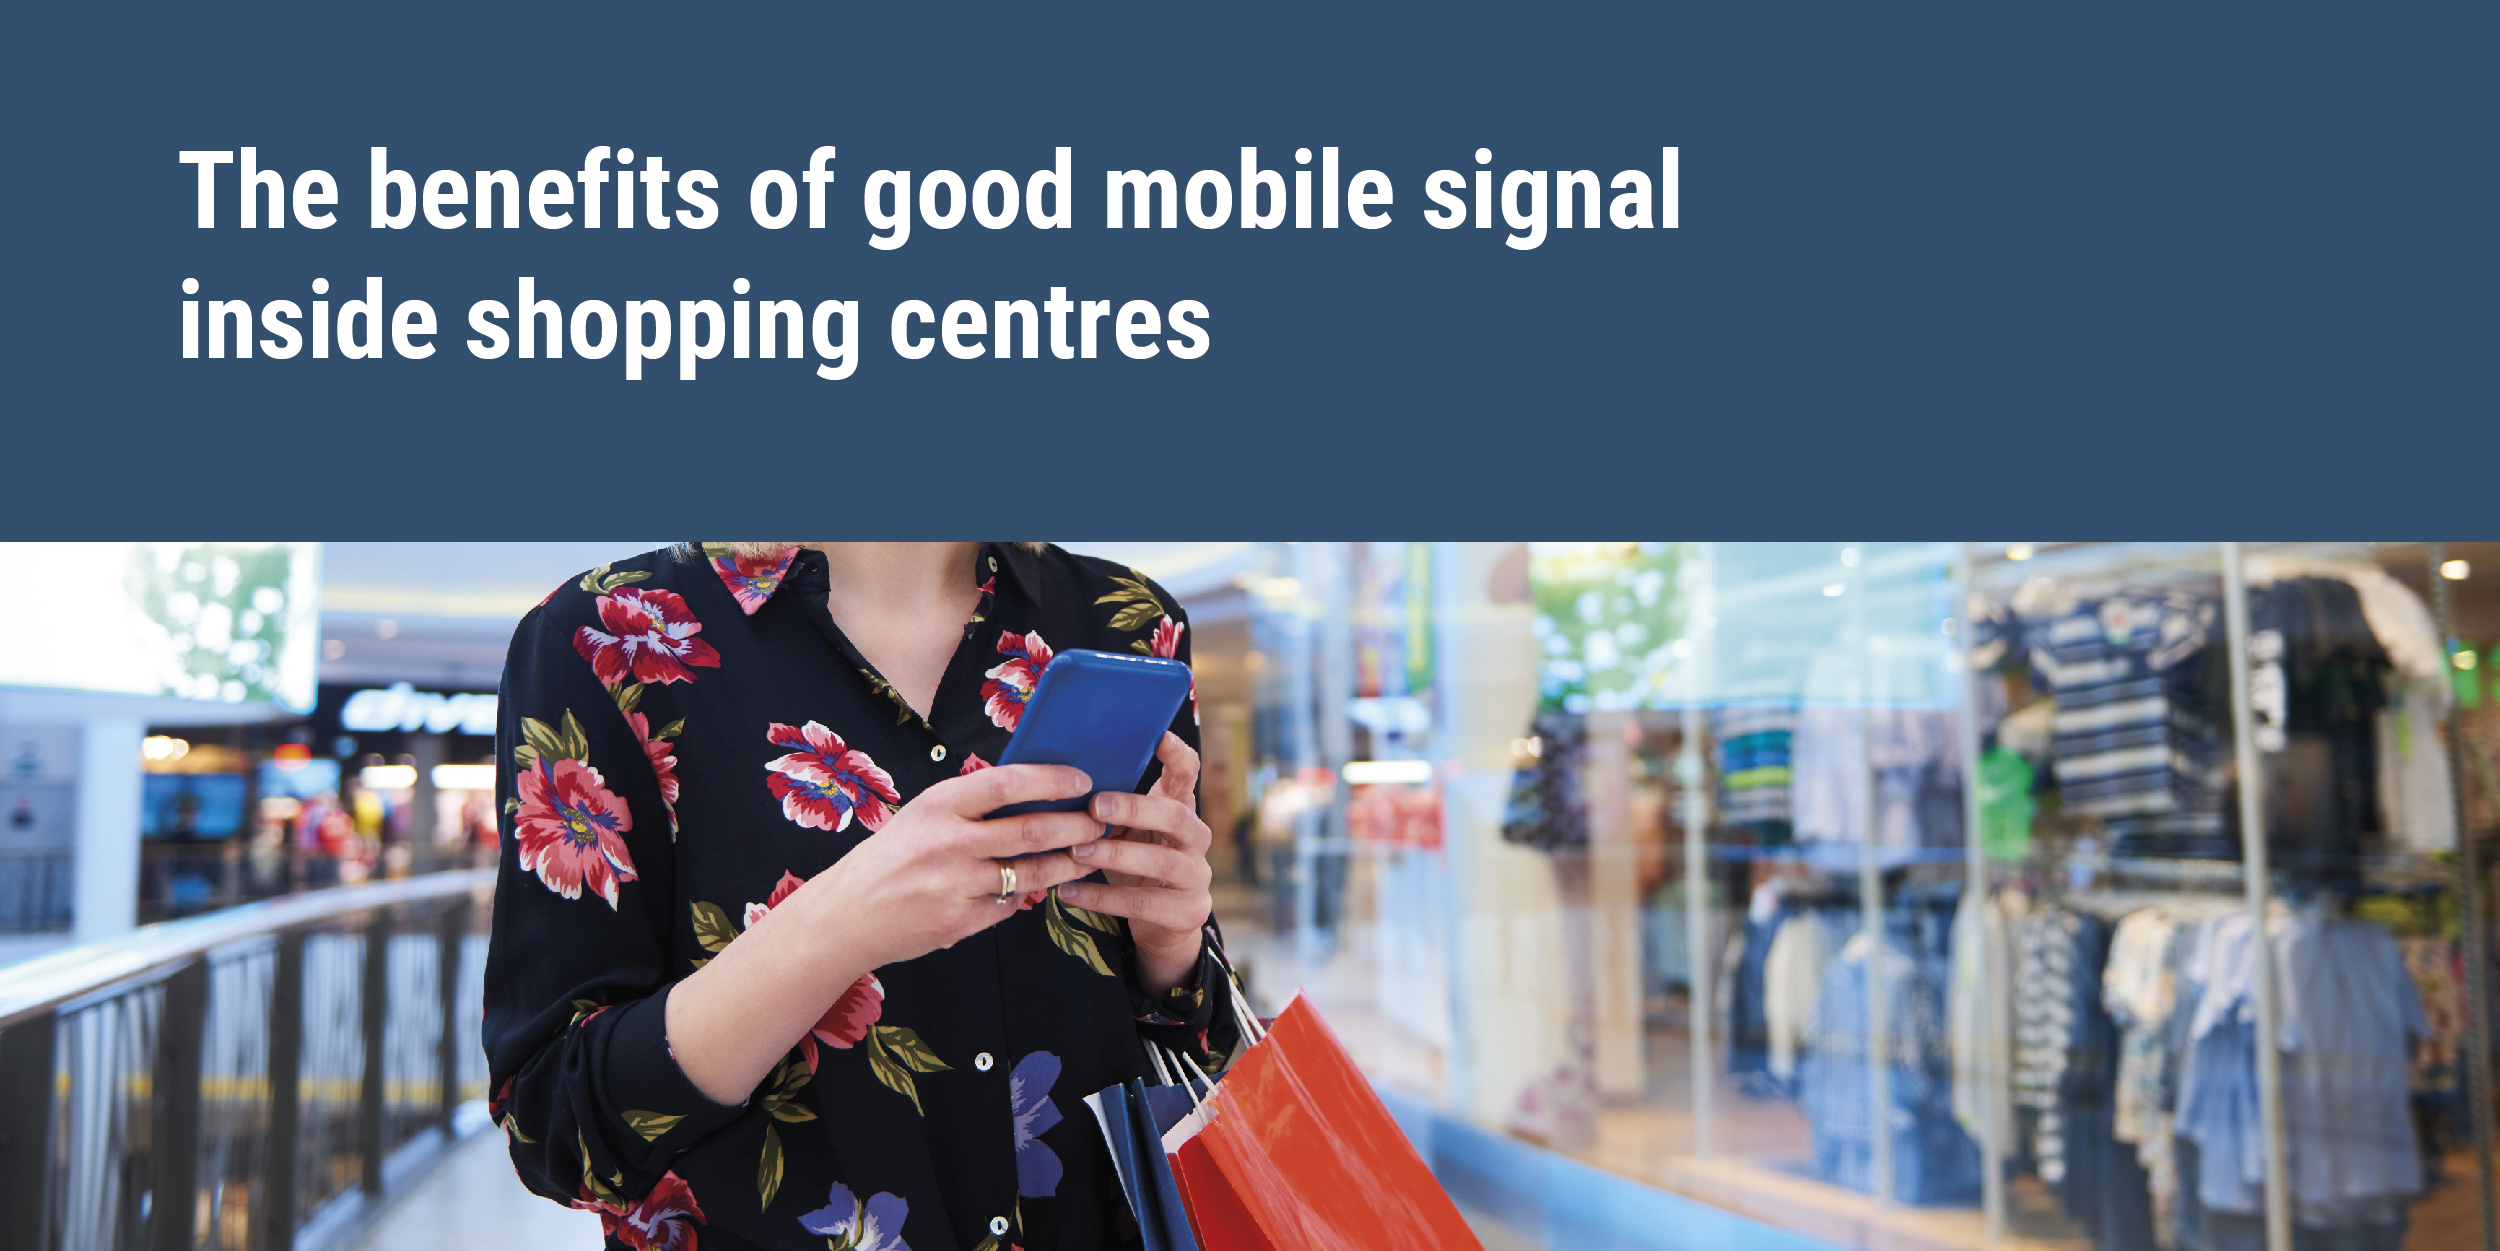 The benefits of good mobile signal inside shopping centres